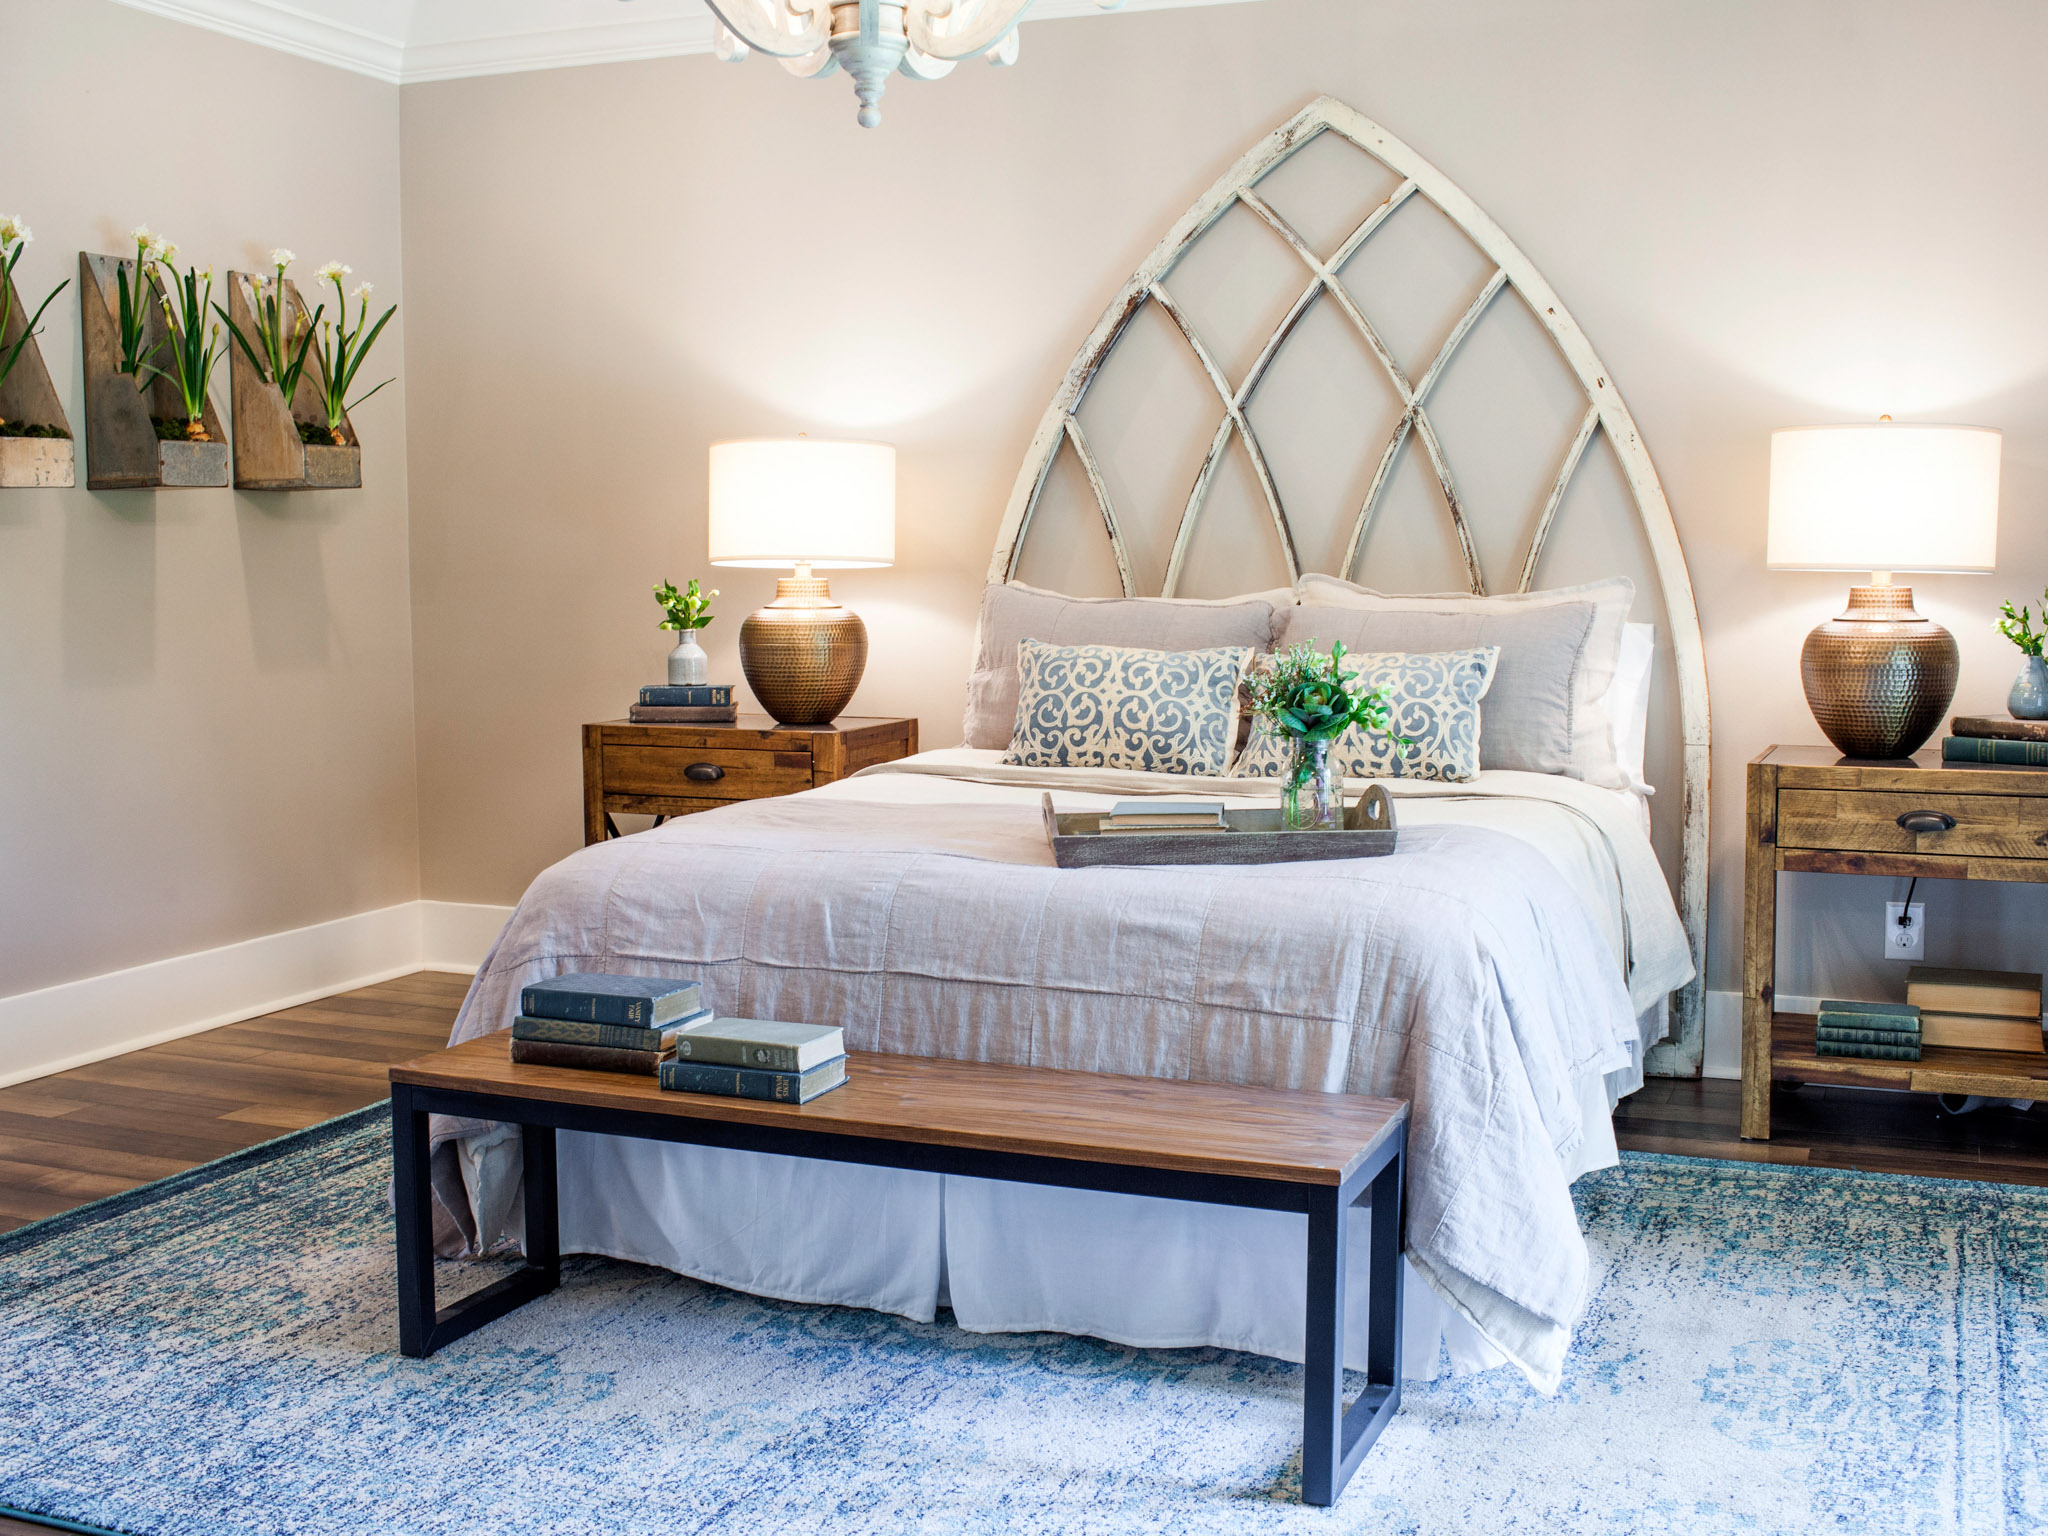 Top 10 Fixer Upper Bedrooms - Daily Dose of Style